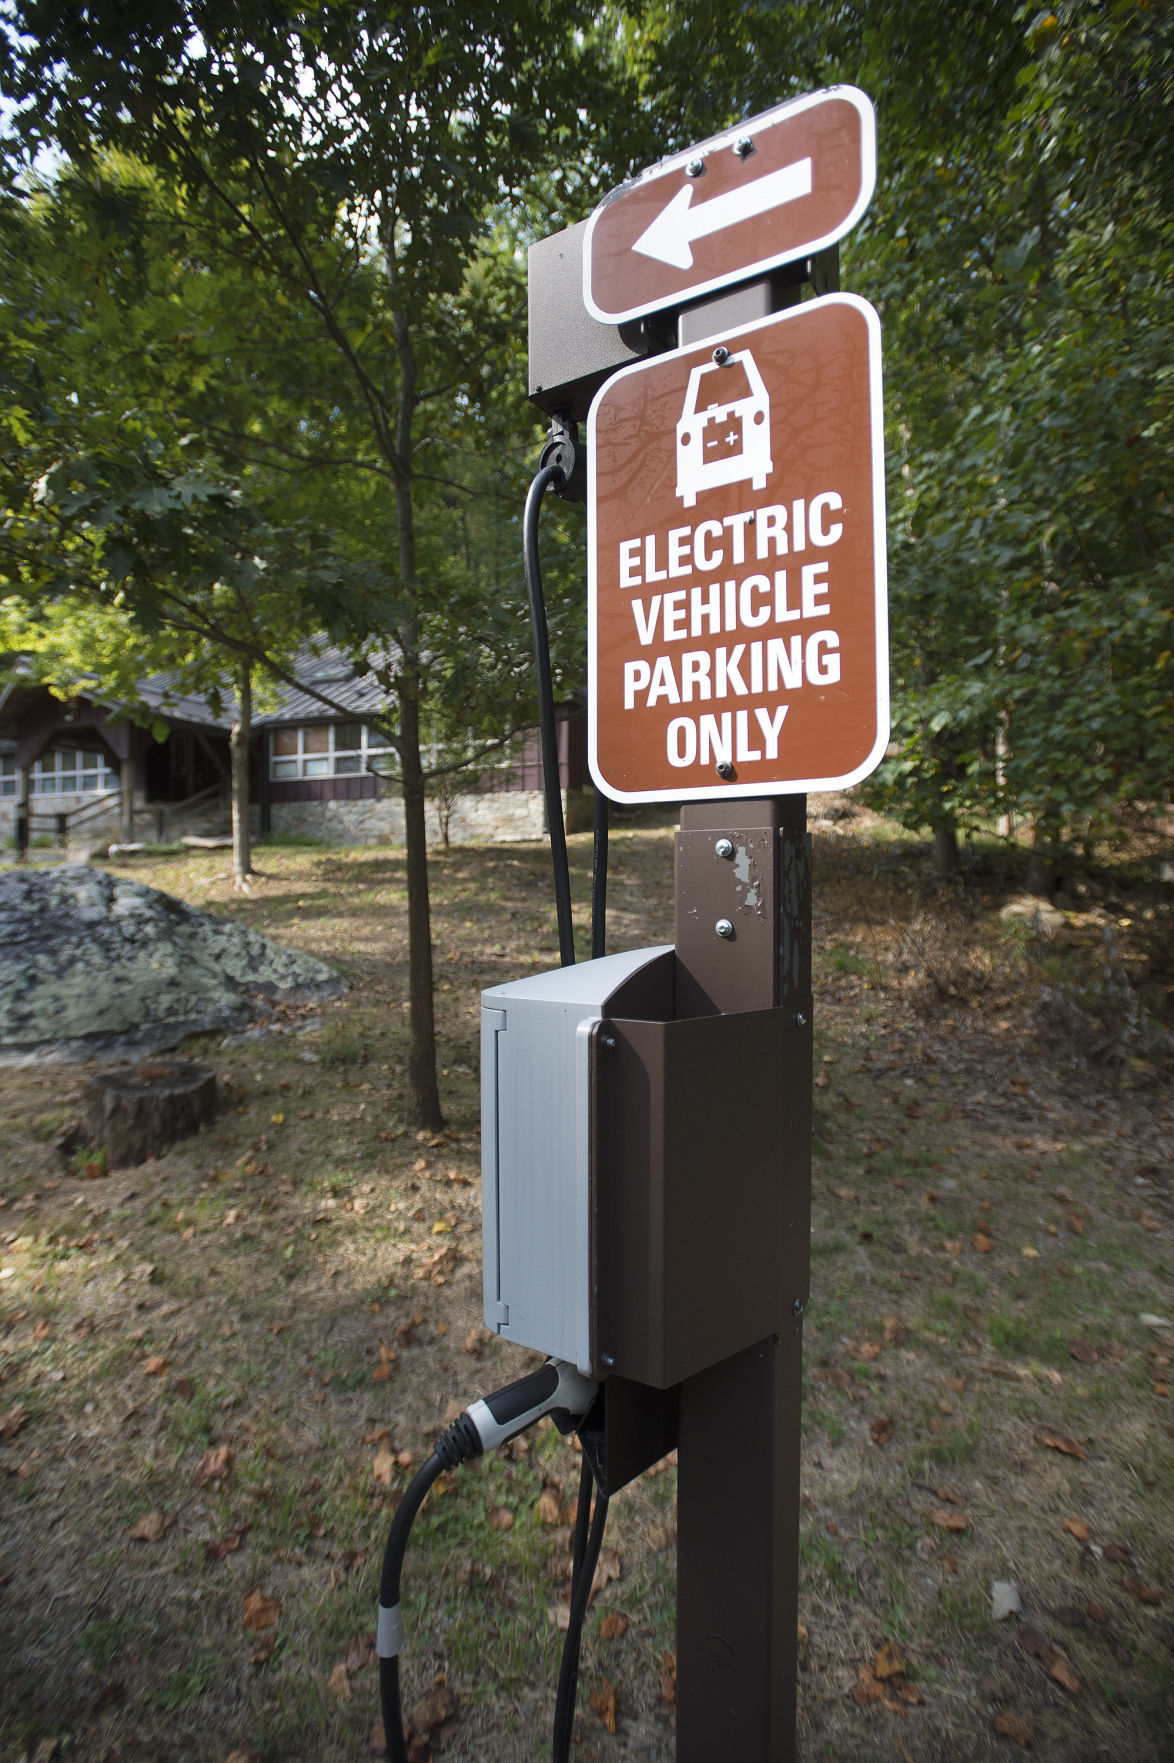 Park's electric car charging stations stand idle | Environment